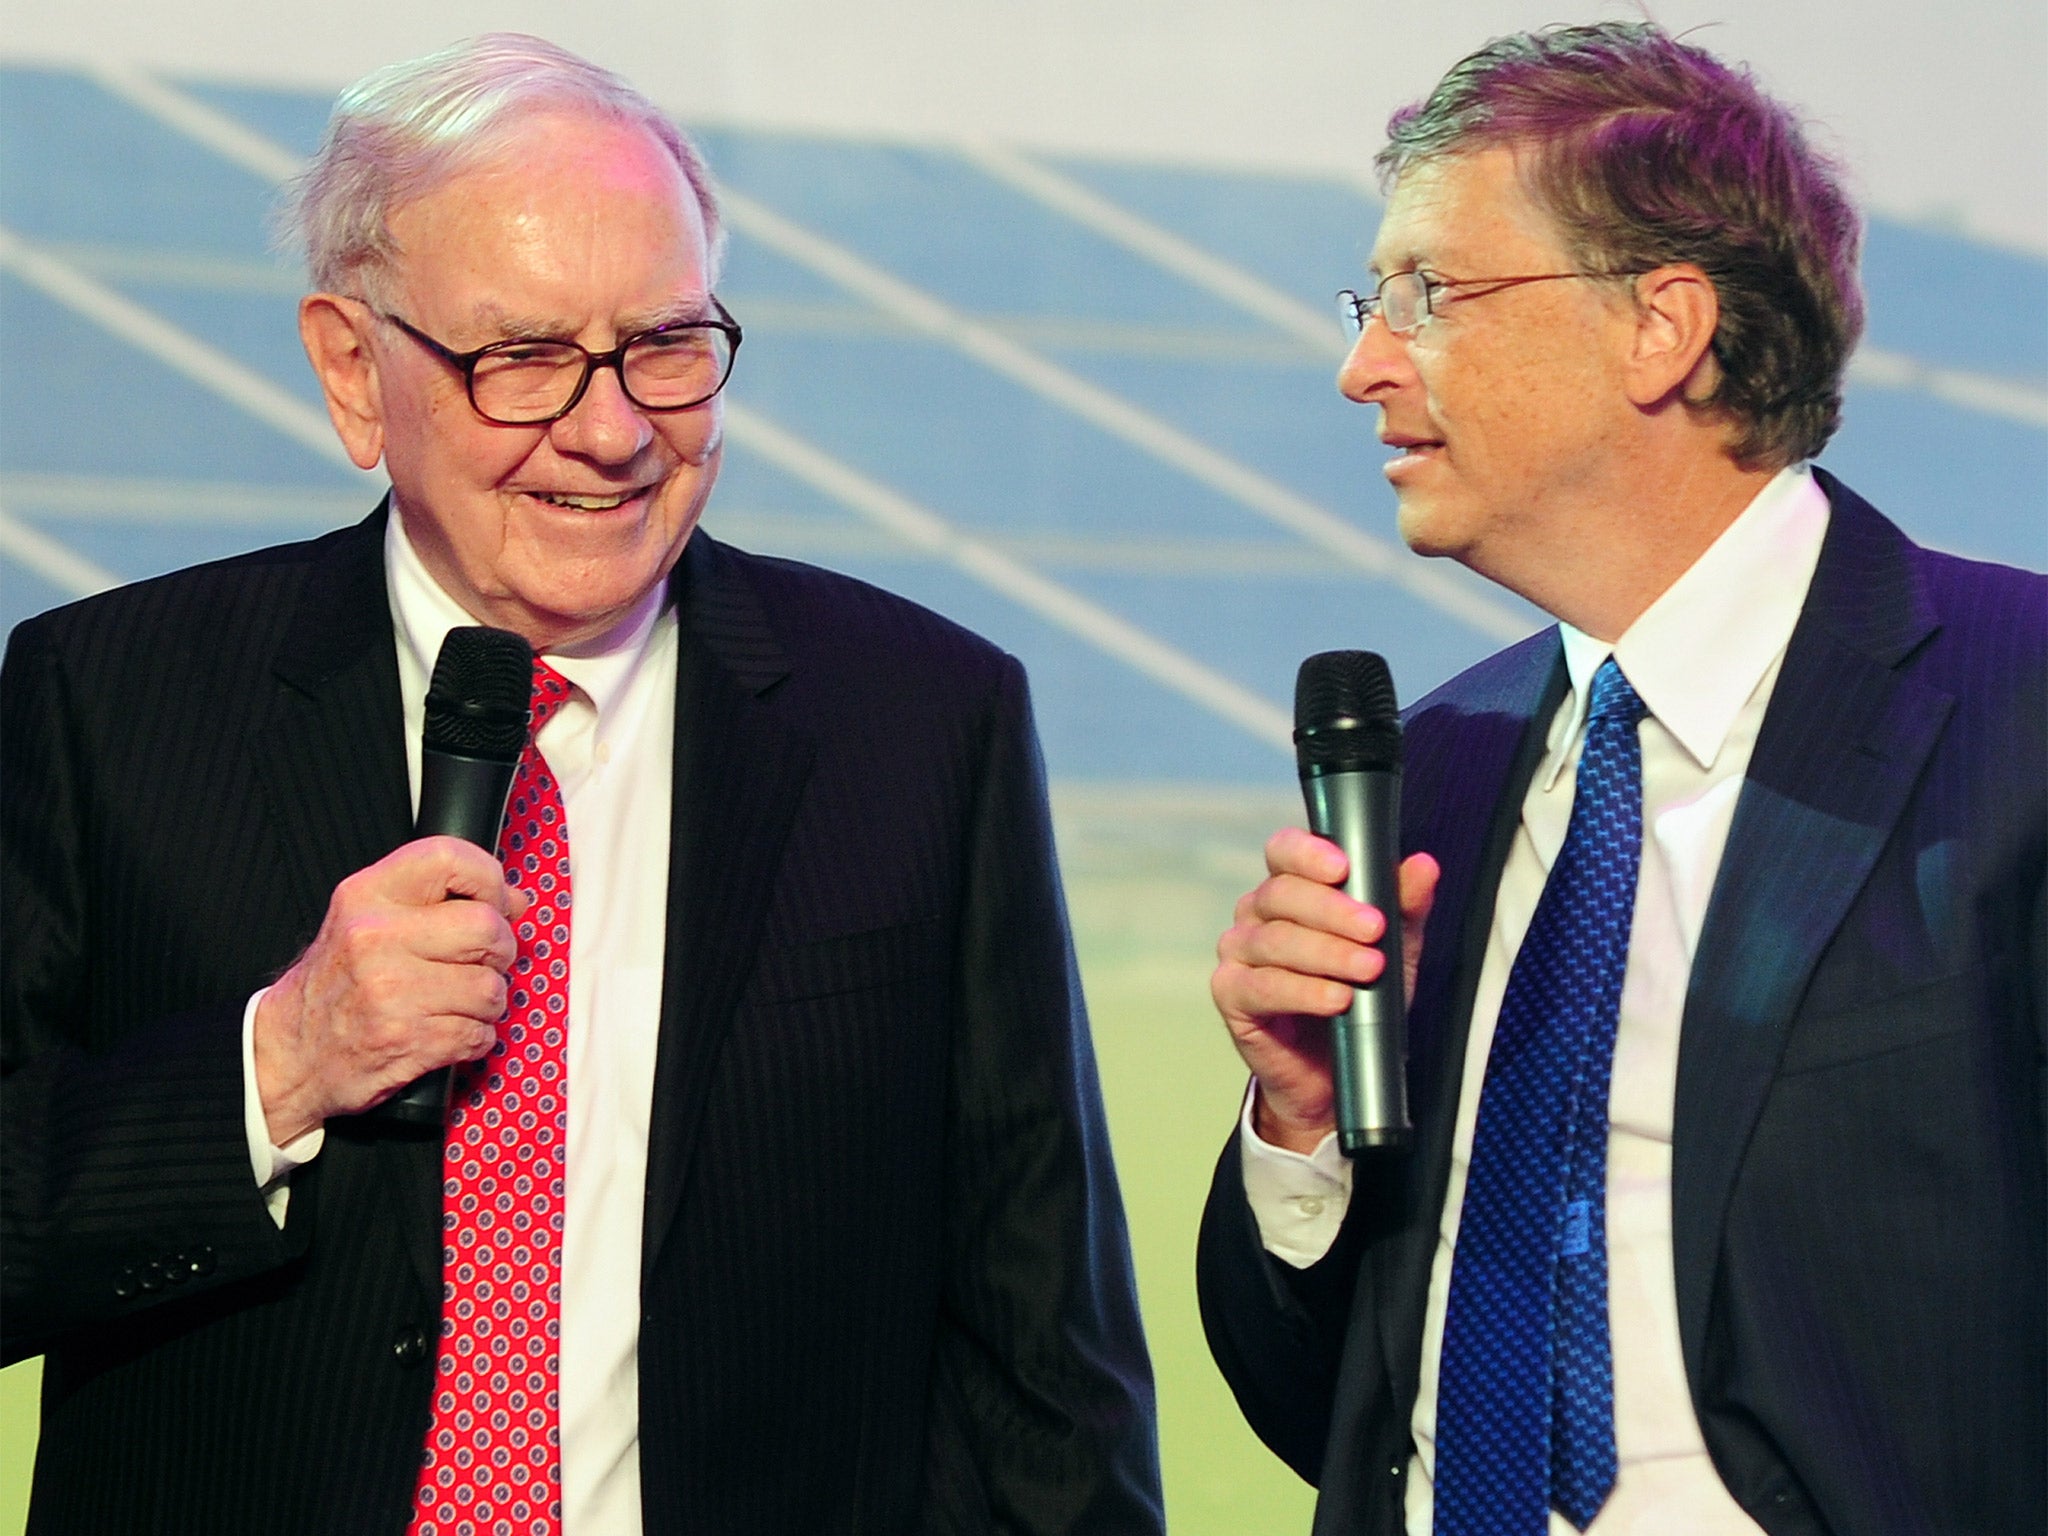 Warren Buffett and Bill Gates are carrying on America’s historic tradition of magnates as philanthropists